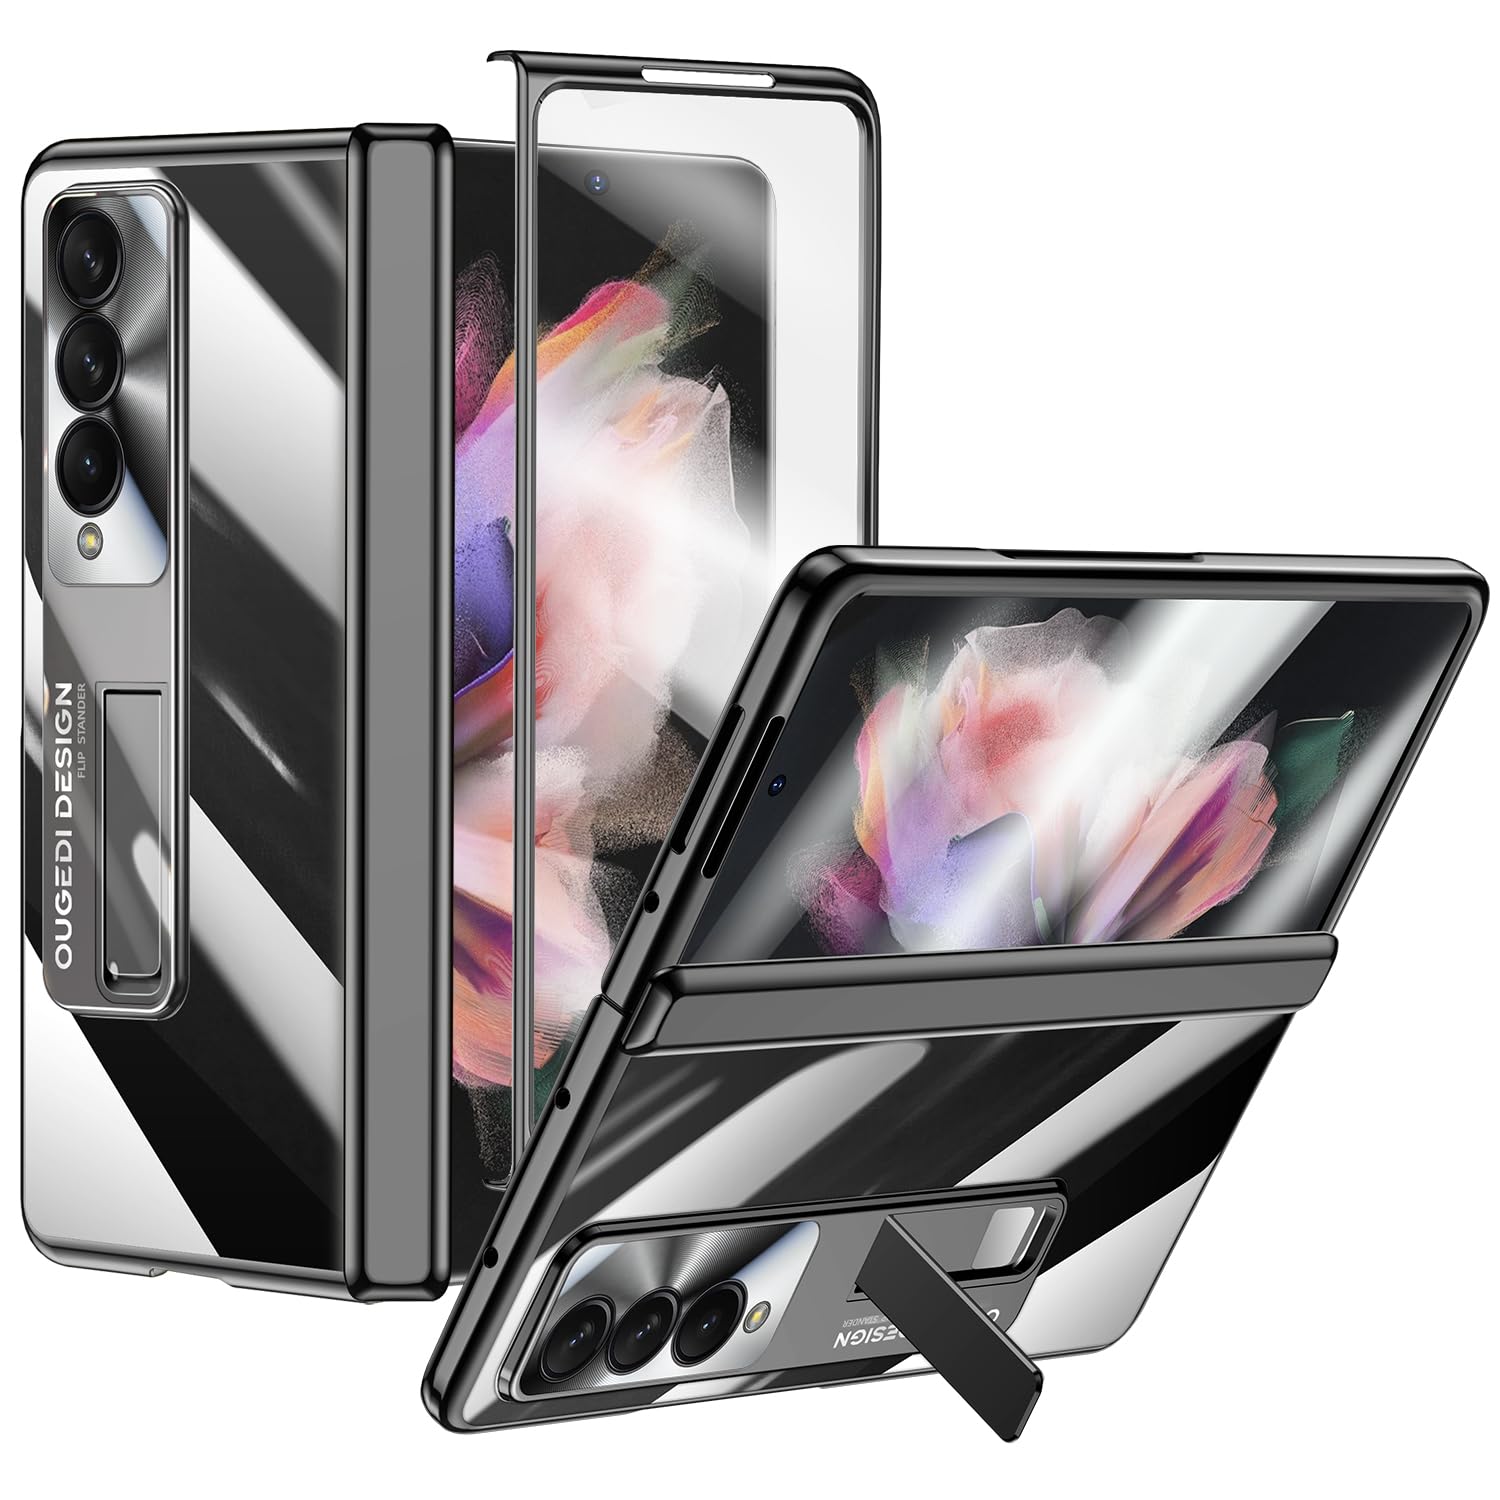 Kaiiecal for Samsung Galaxy Z Fold 3 Phone Case: Sleek Clear Electroplated Stand Protective Phone Case- Anti-Scratches Elegant Luxury Cover for Galaxy Z Fold 3 5G-Black